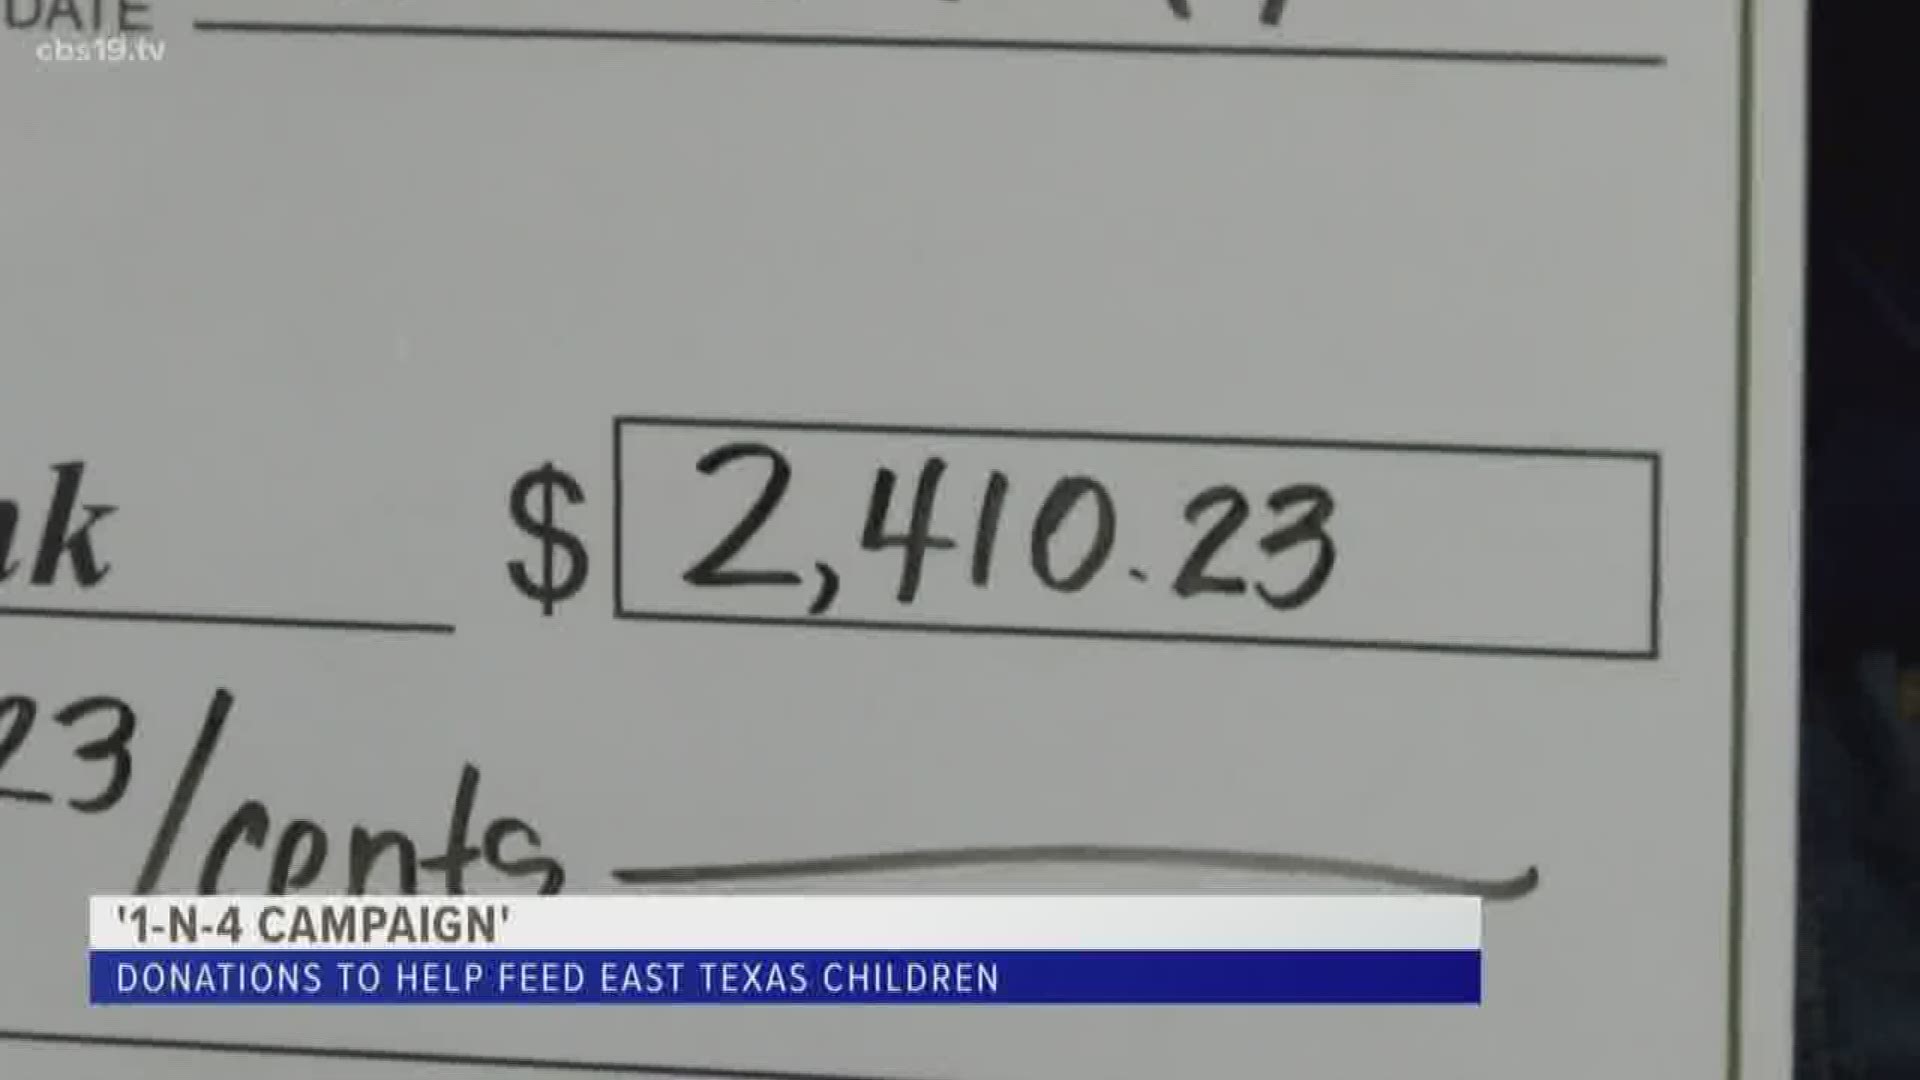 The 1-N-4 campaign helped to raise nearly $2,500 to East Texas children in need.